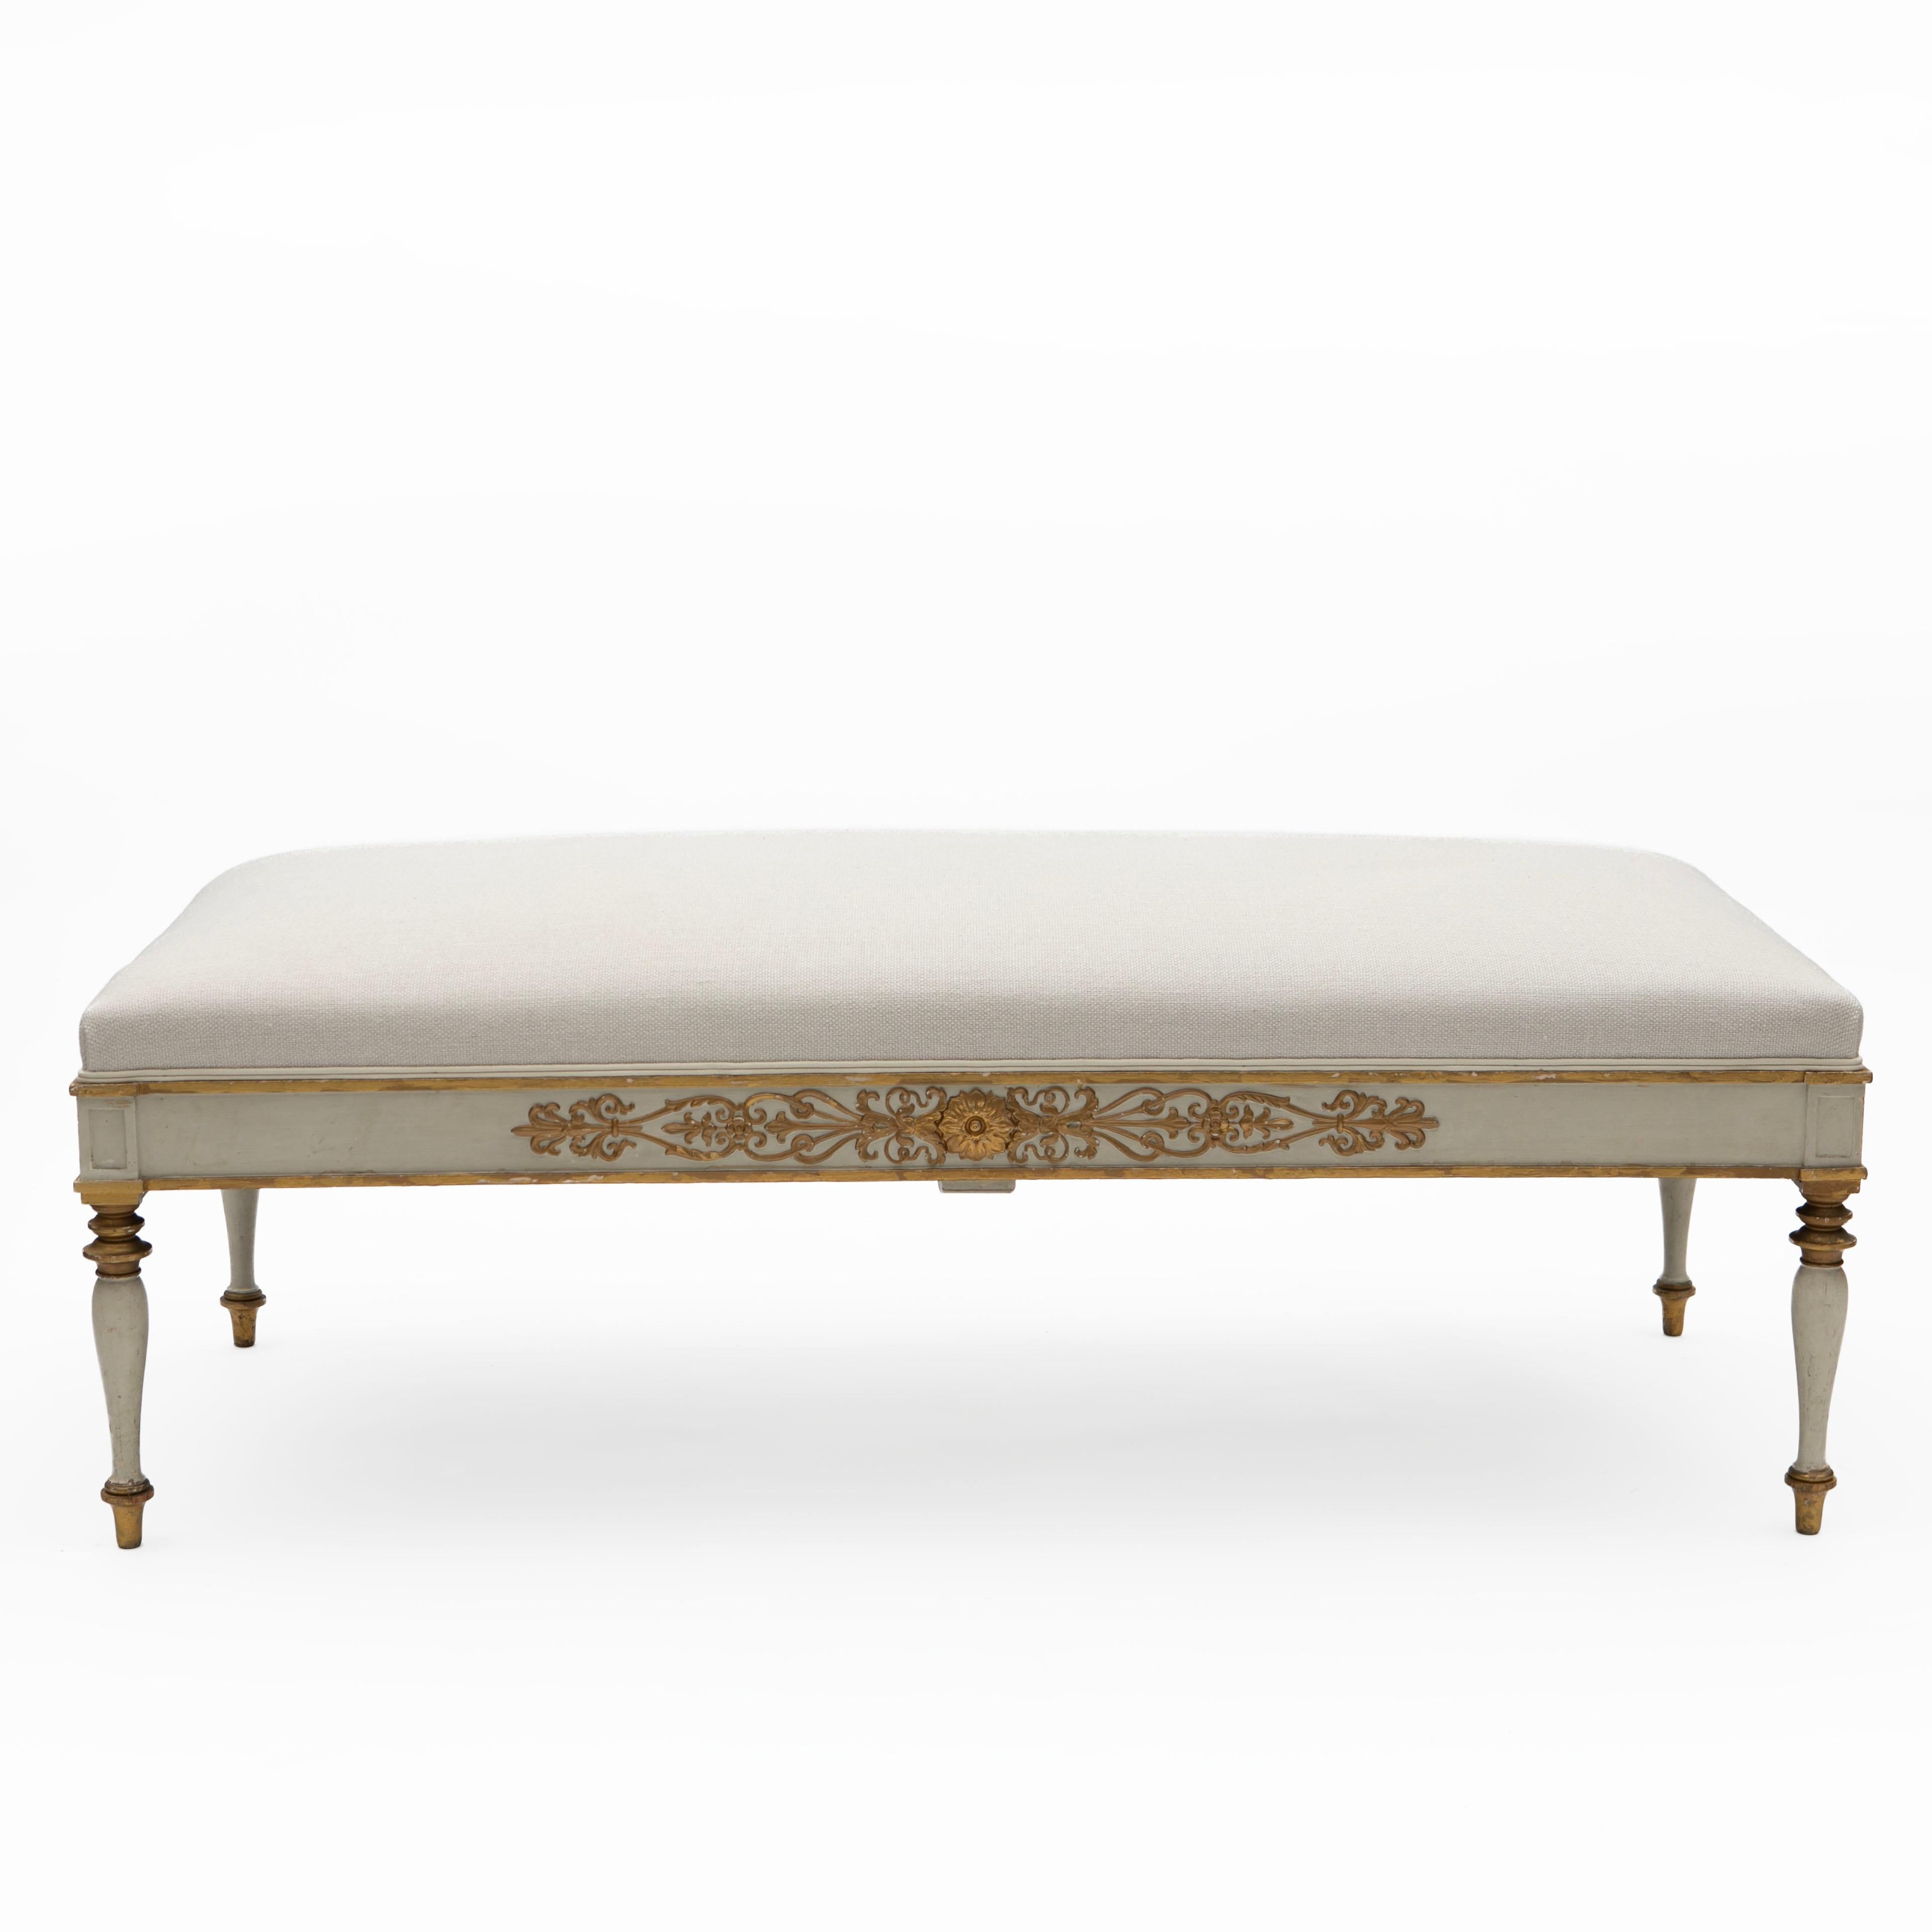 Decorative and elegant Late Empire bench with upholstered seat.
Frame crafted in beech with original white color and delicate gilt wood carved details.
Resting on elegant turned tapered legs with gilt details at the top and bottom.
Seat with